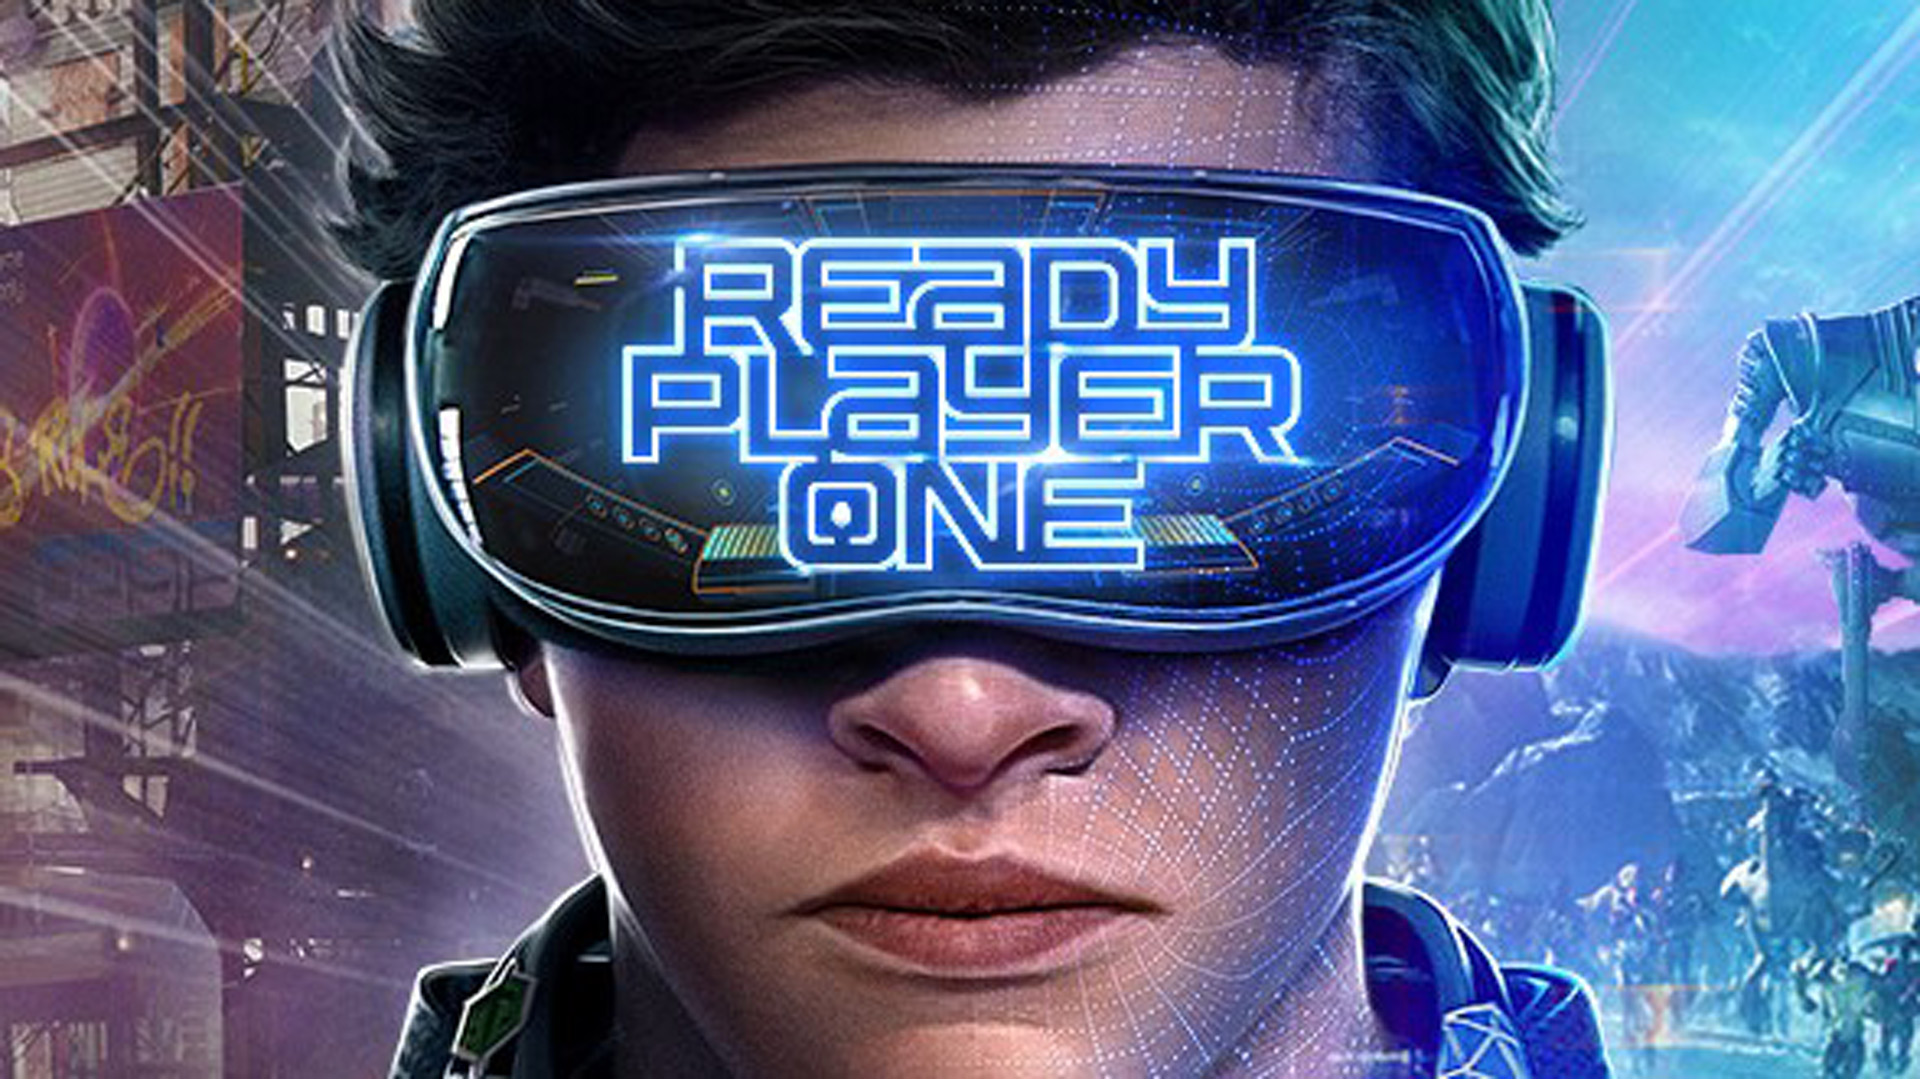 HTC Says Watching 'Ready Player One' Boosts VR Purchase Intent in China